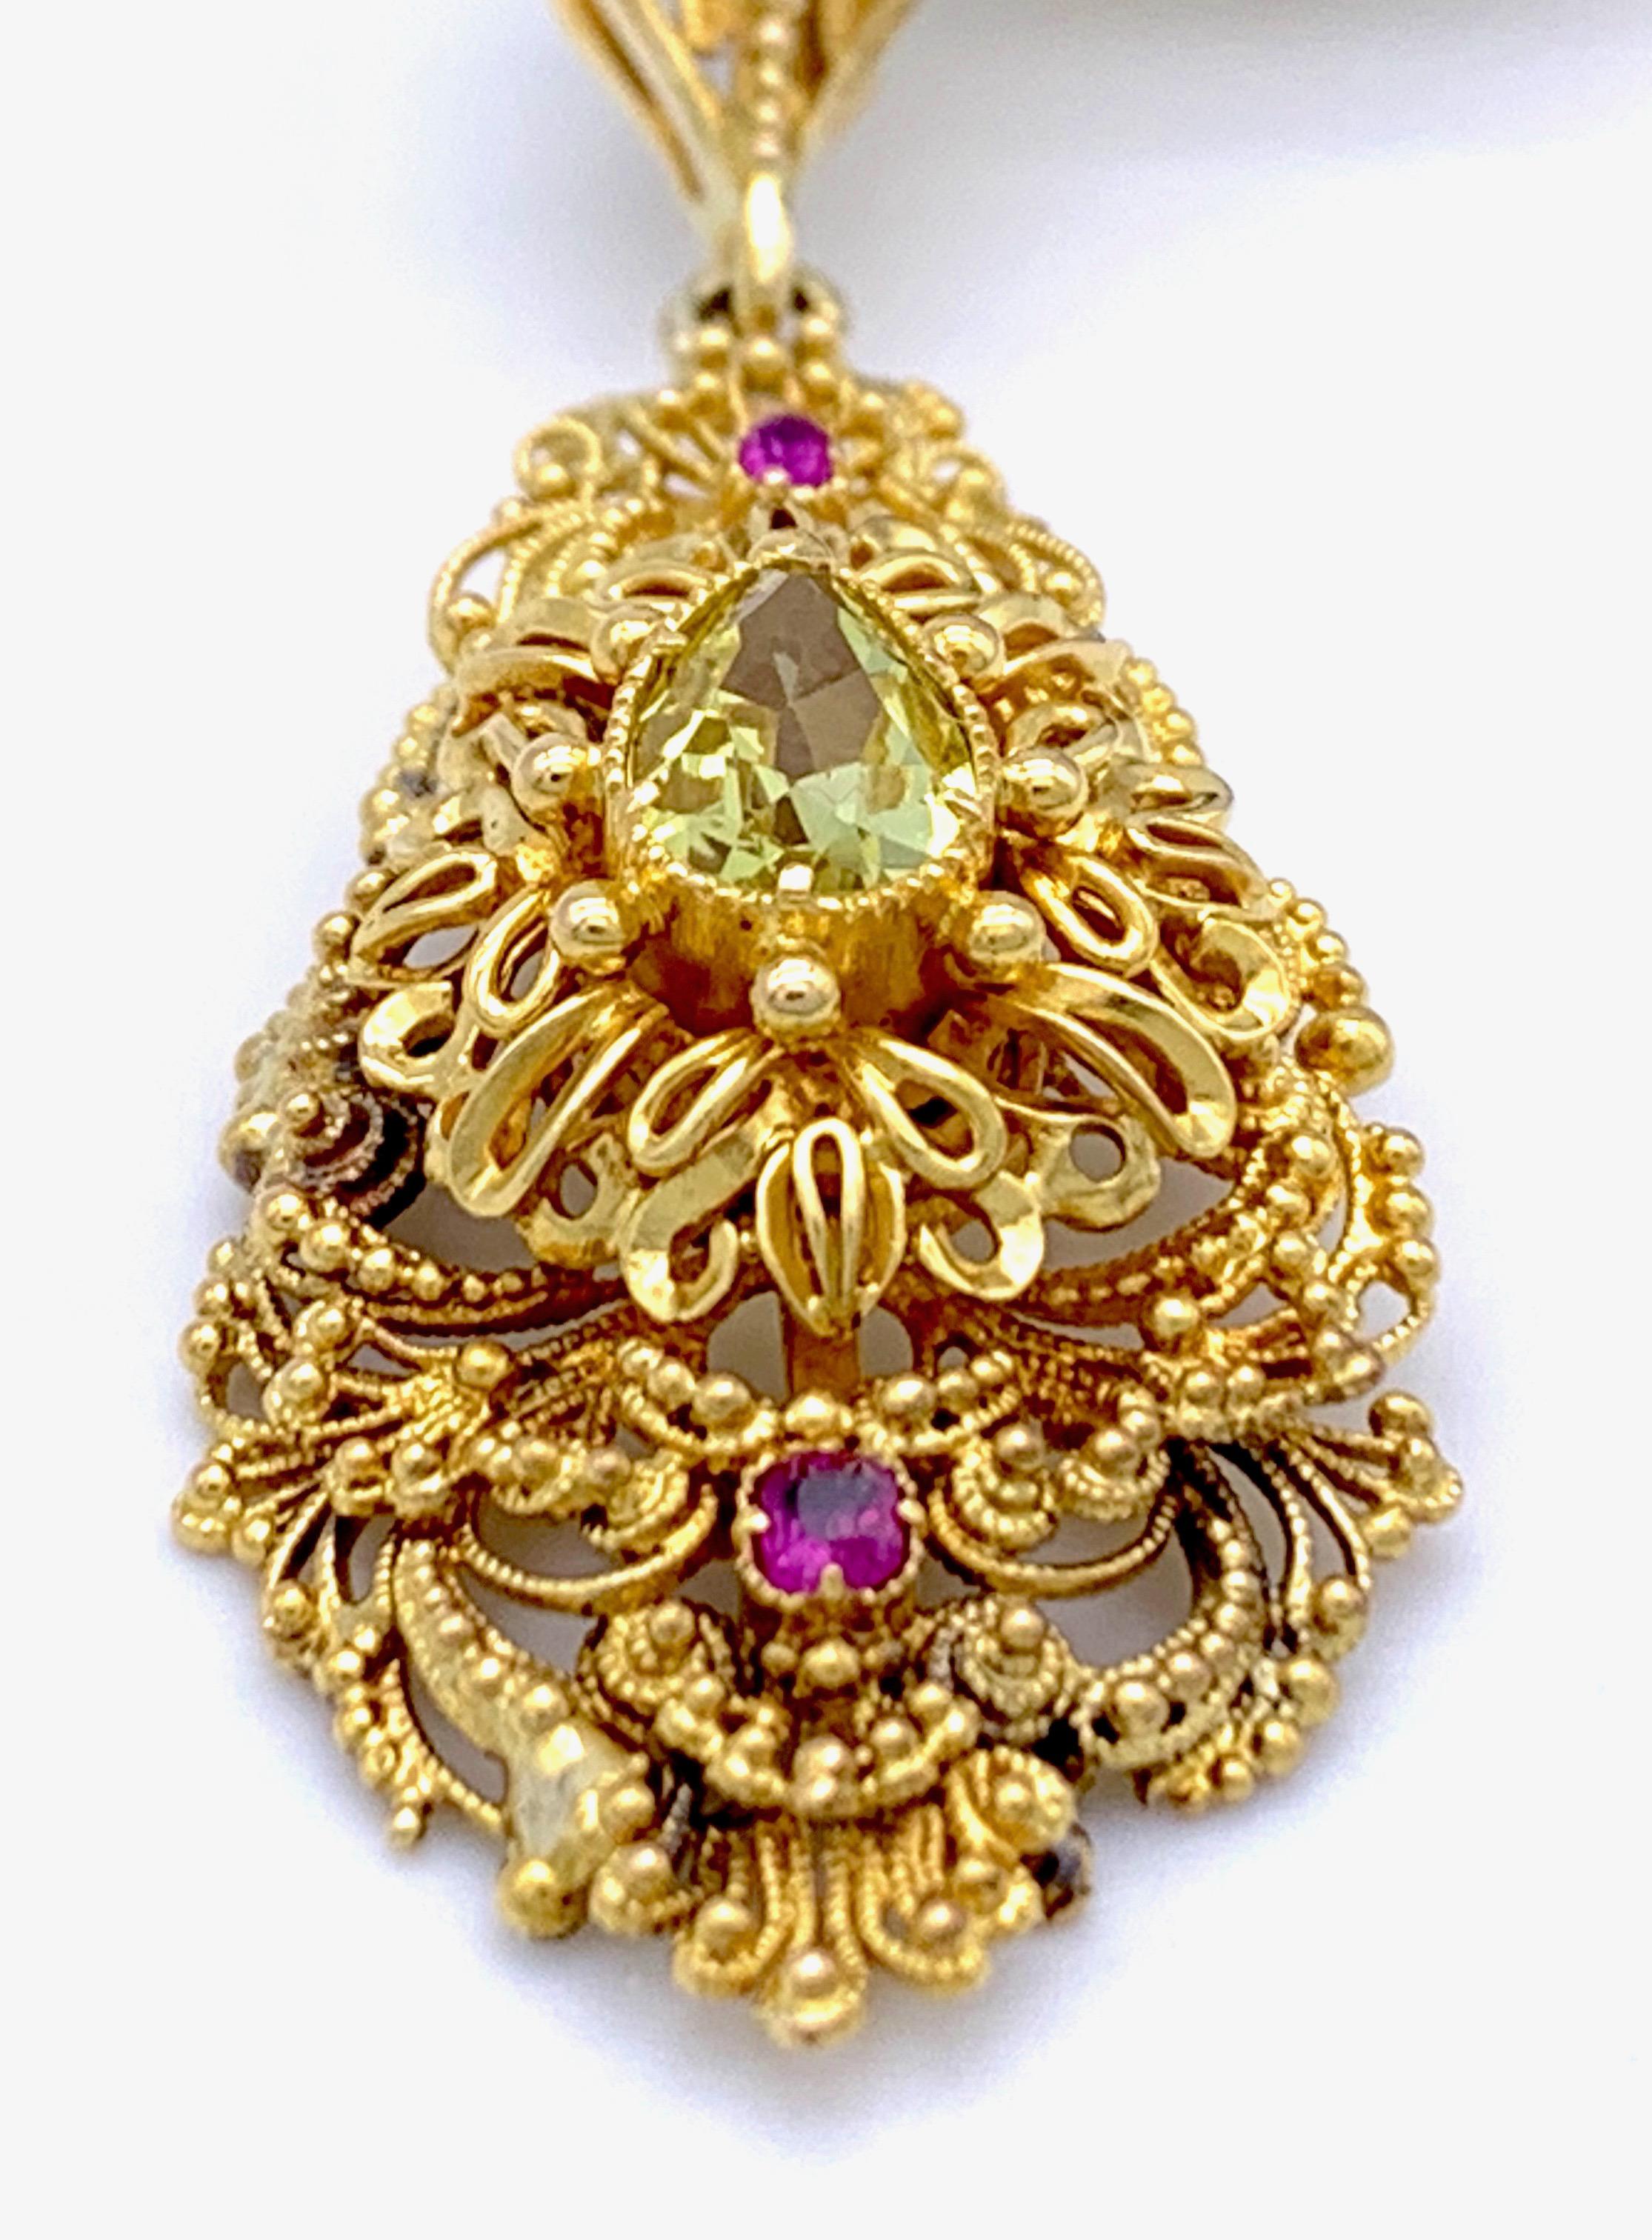 Vintage Dragon Carved Jadeite Topas Ruby 18 Karat Gold Brooch with Pendant In Excellent Condition For Sale In Munich, Bavaria